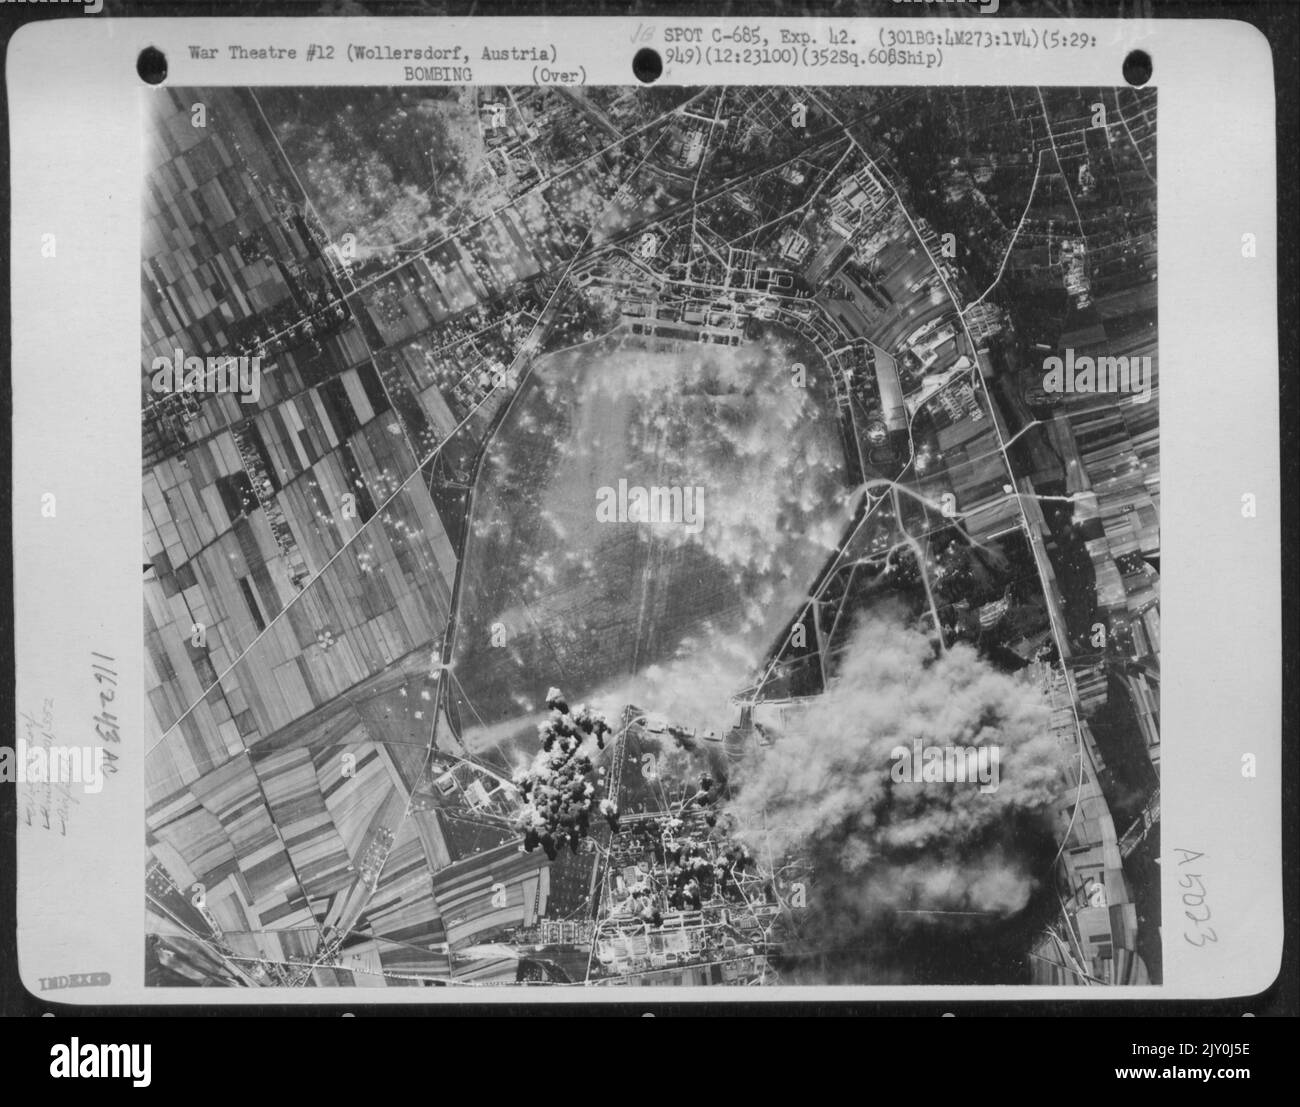 Bombs Dropped By The 301St Bomb Group, 352Nd Bomb Squadron On 29 May 1944 Wreaked Destruction On The Airdome At Wollersdorf, Austria. Stock Photo